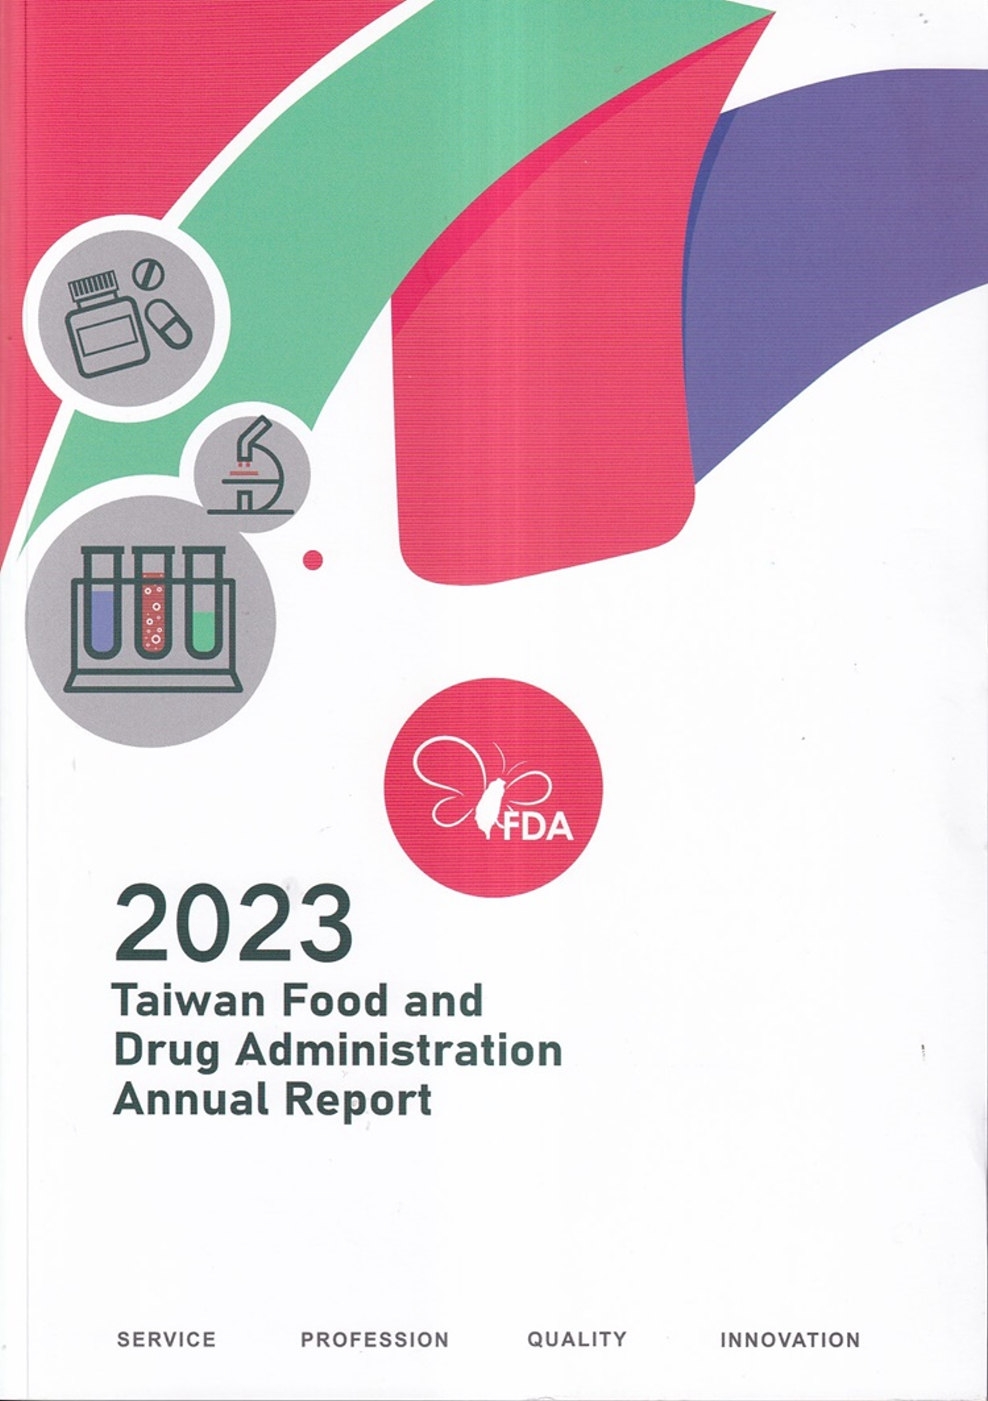 2023 Taiwan Food and Drug Administration Annual Report